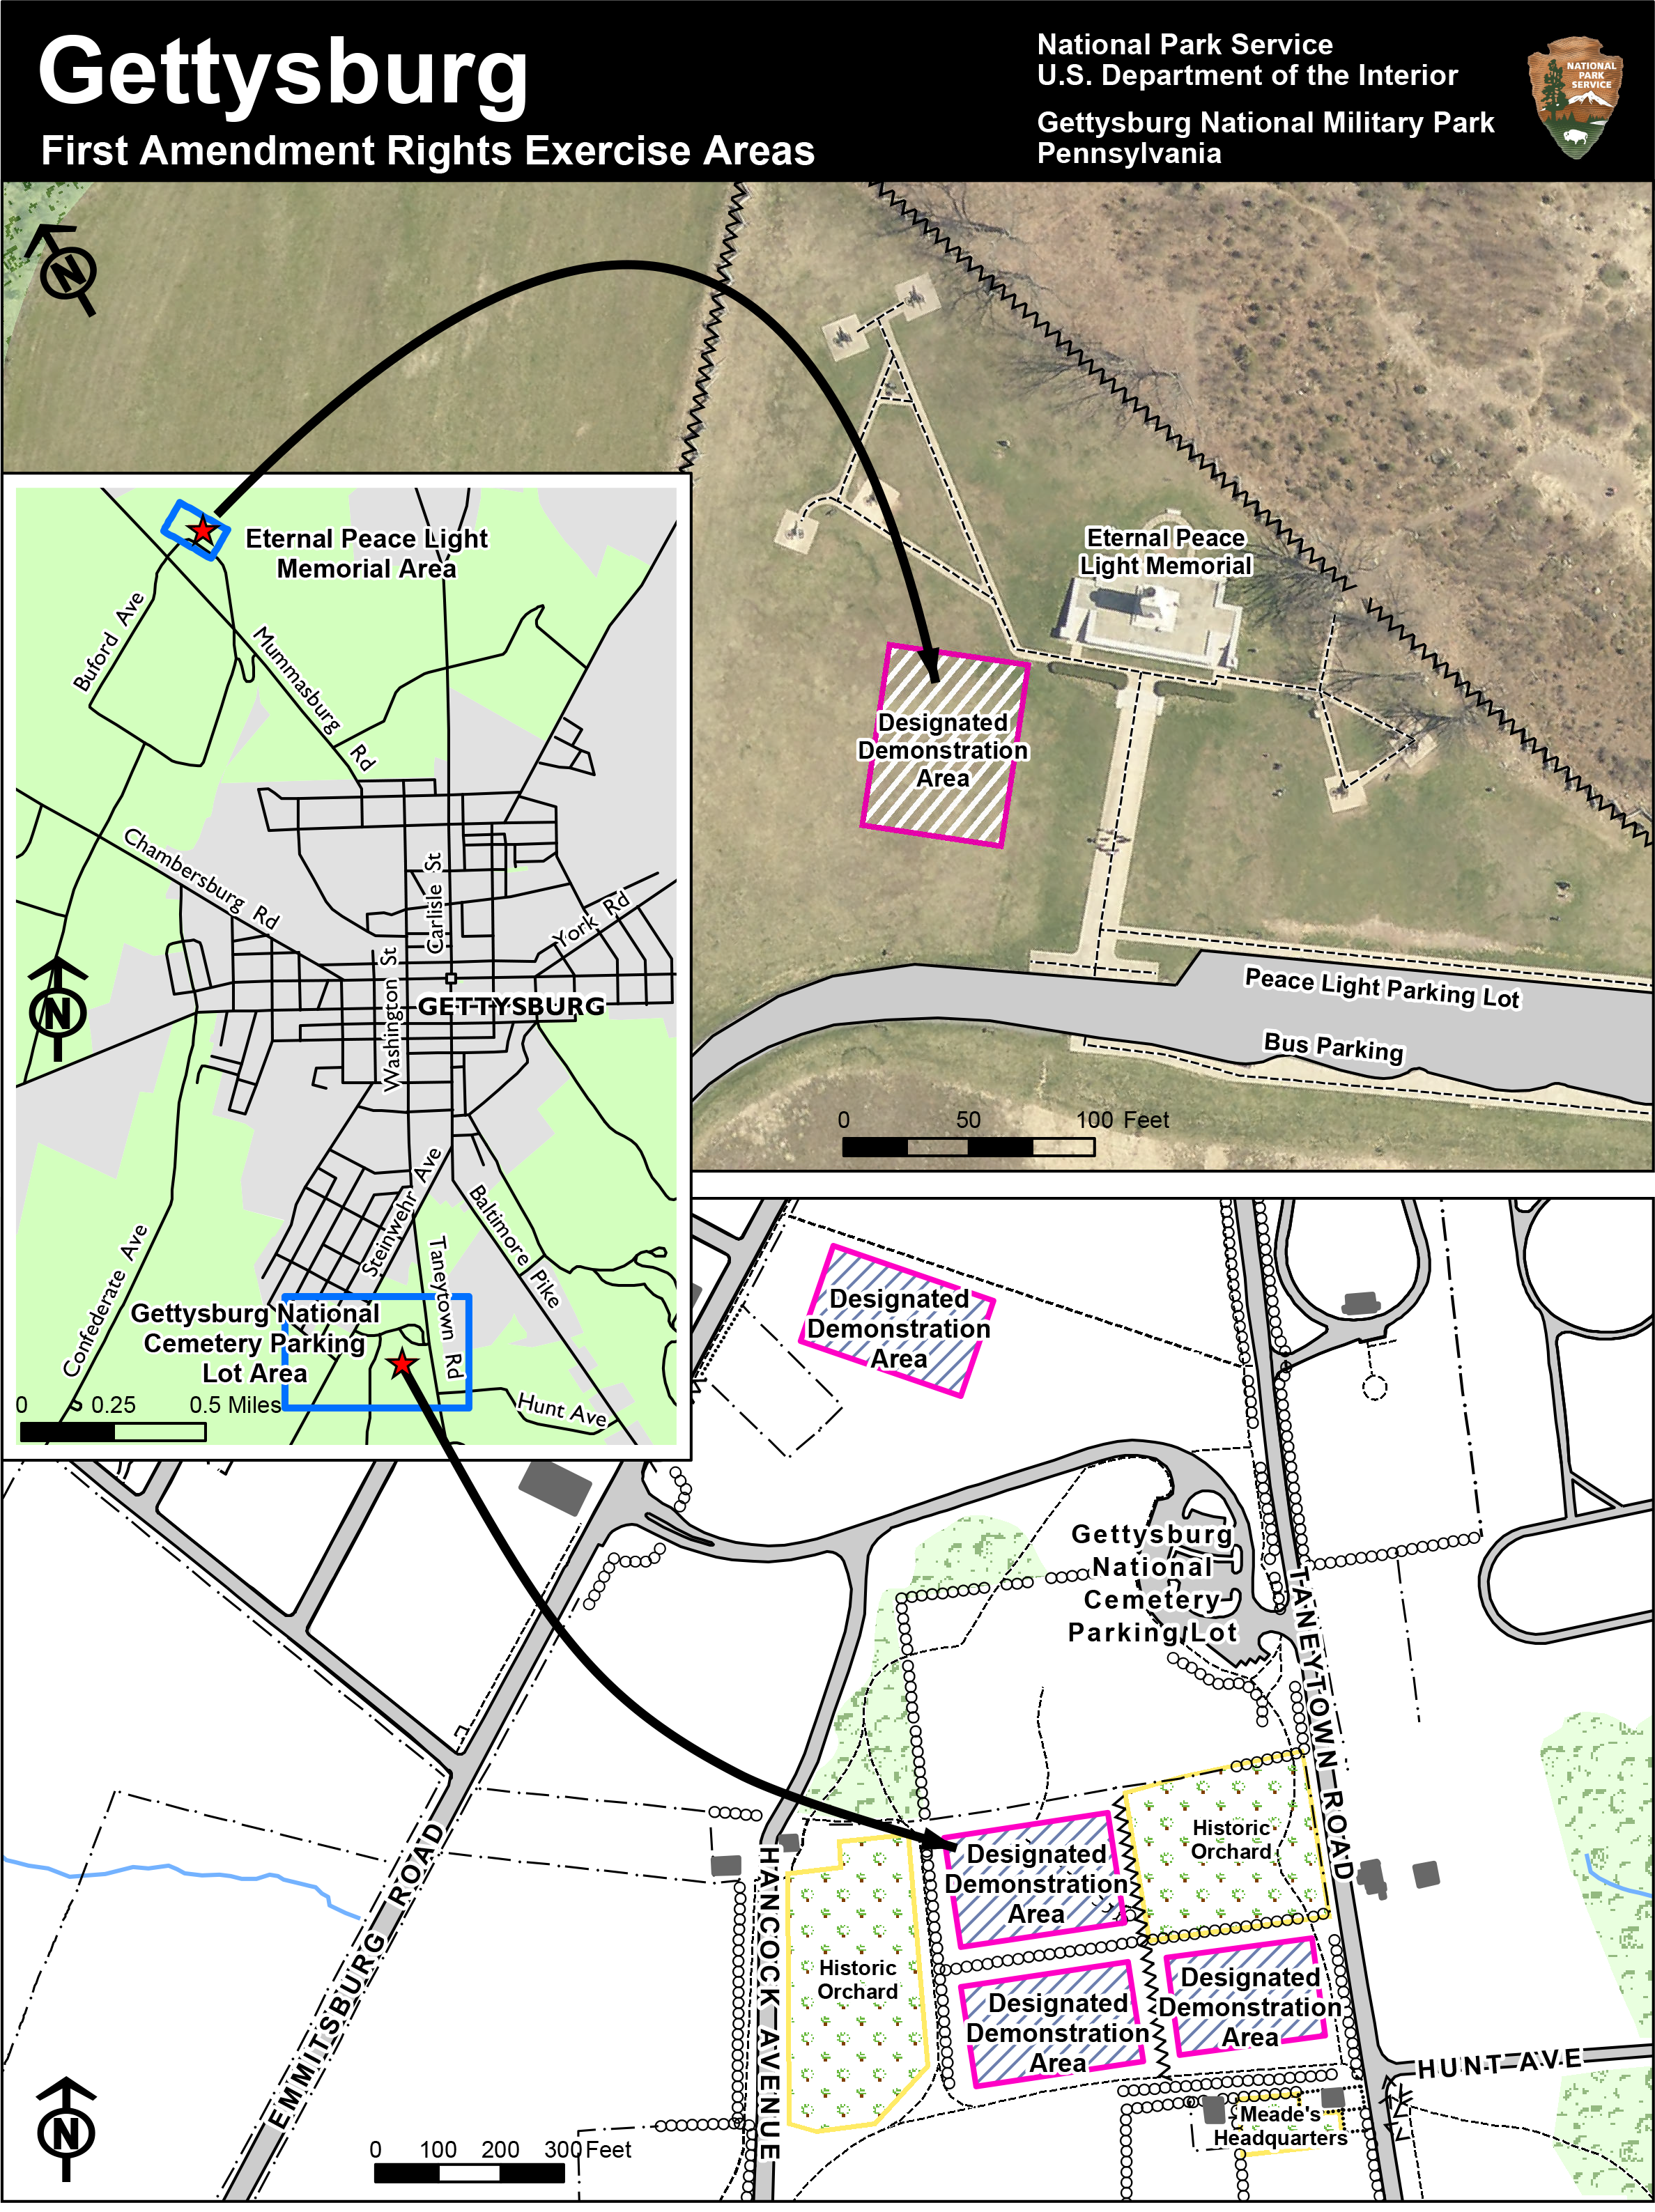 A map showing where the First Amendment areas are located at Gettysburg National Military Park.